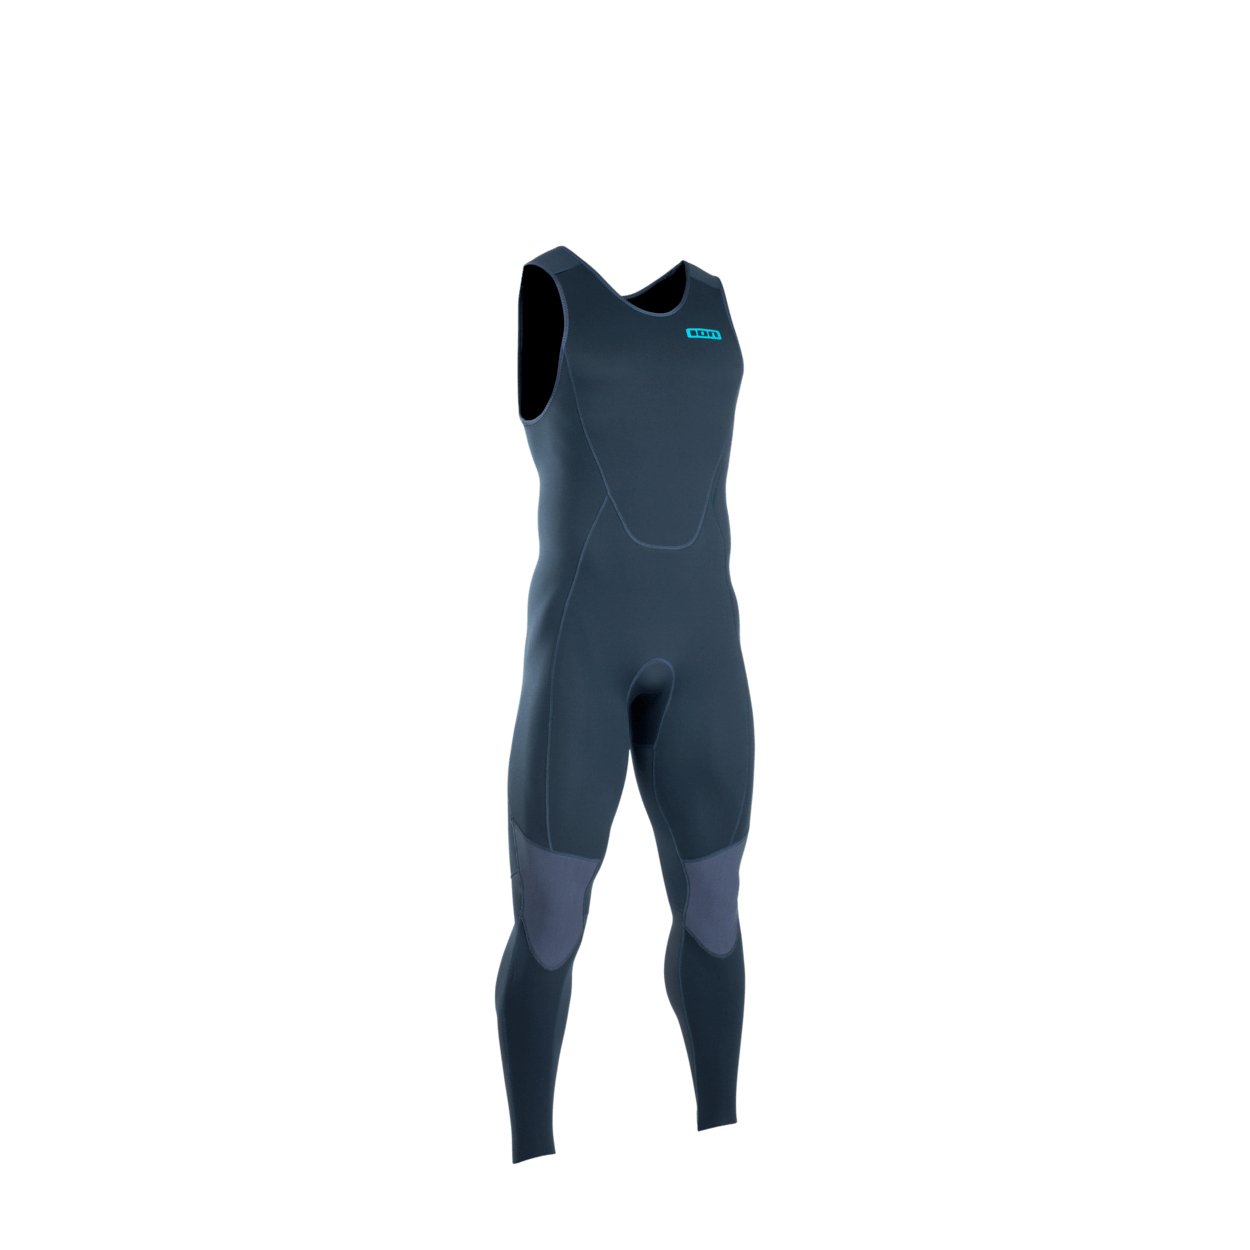 ION Long John Element 2.0 2022 - Worthing Watersports - 9008415881093 - Wetsuits - ION Water